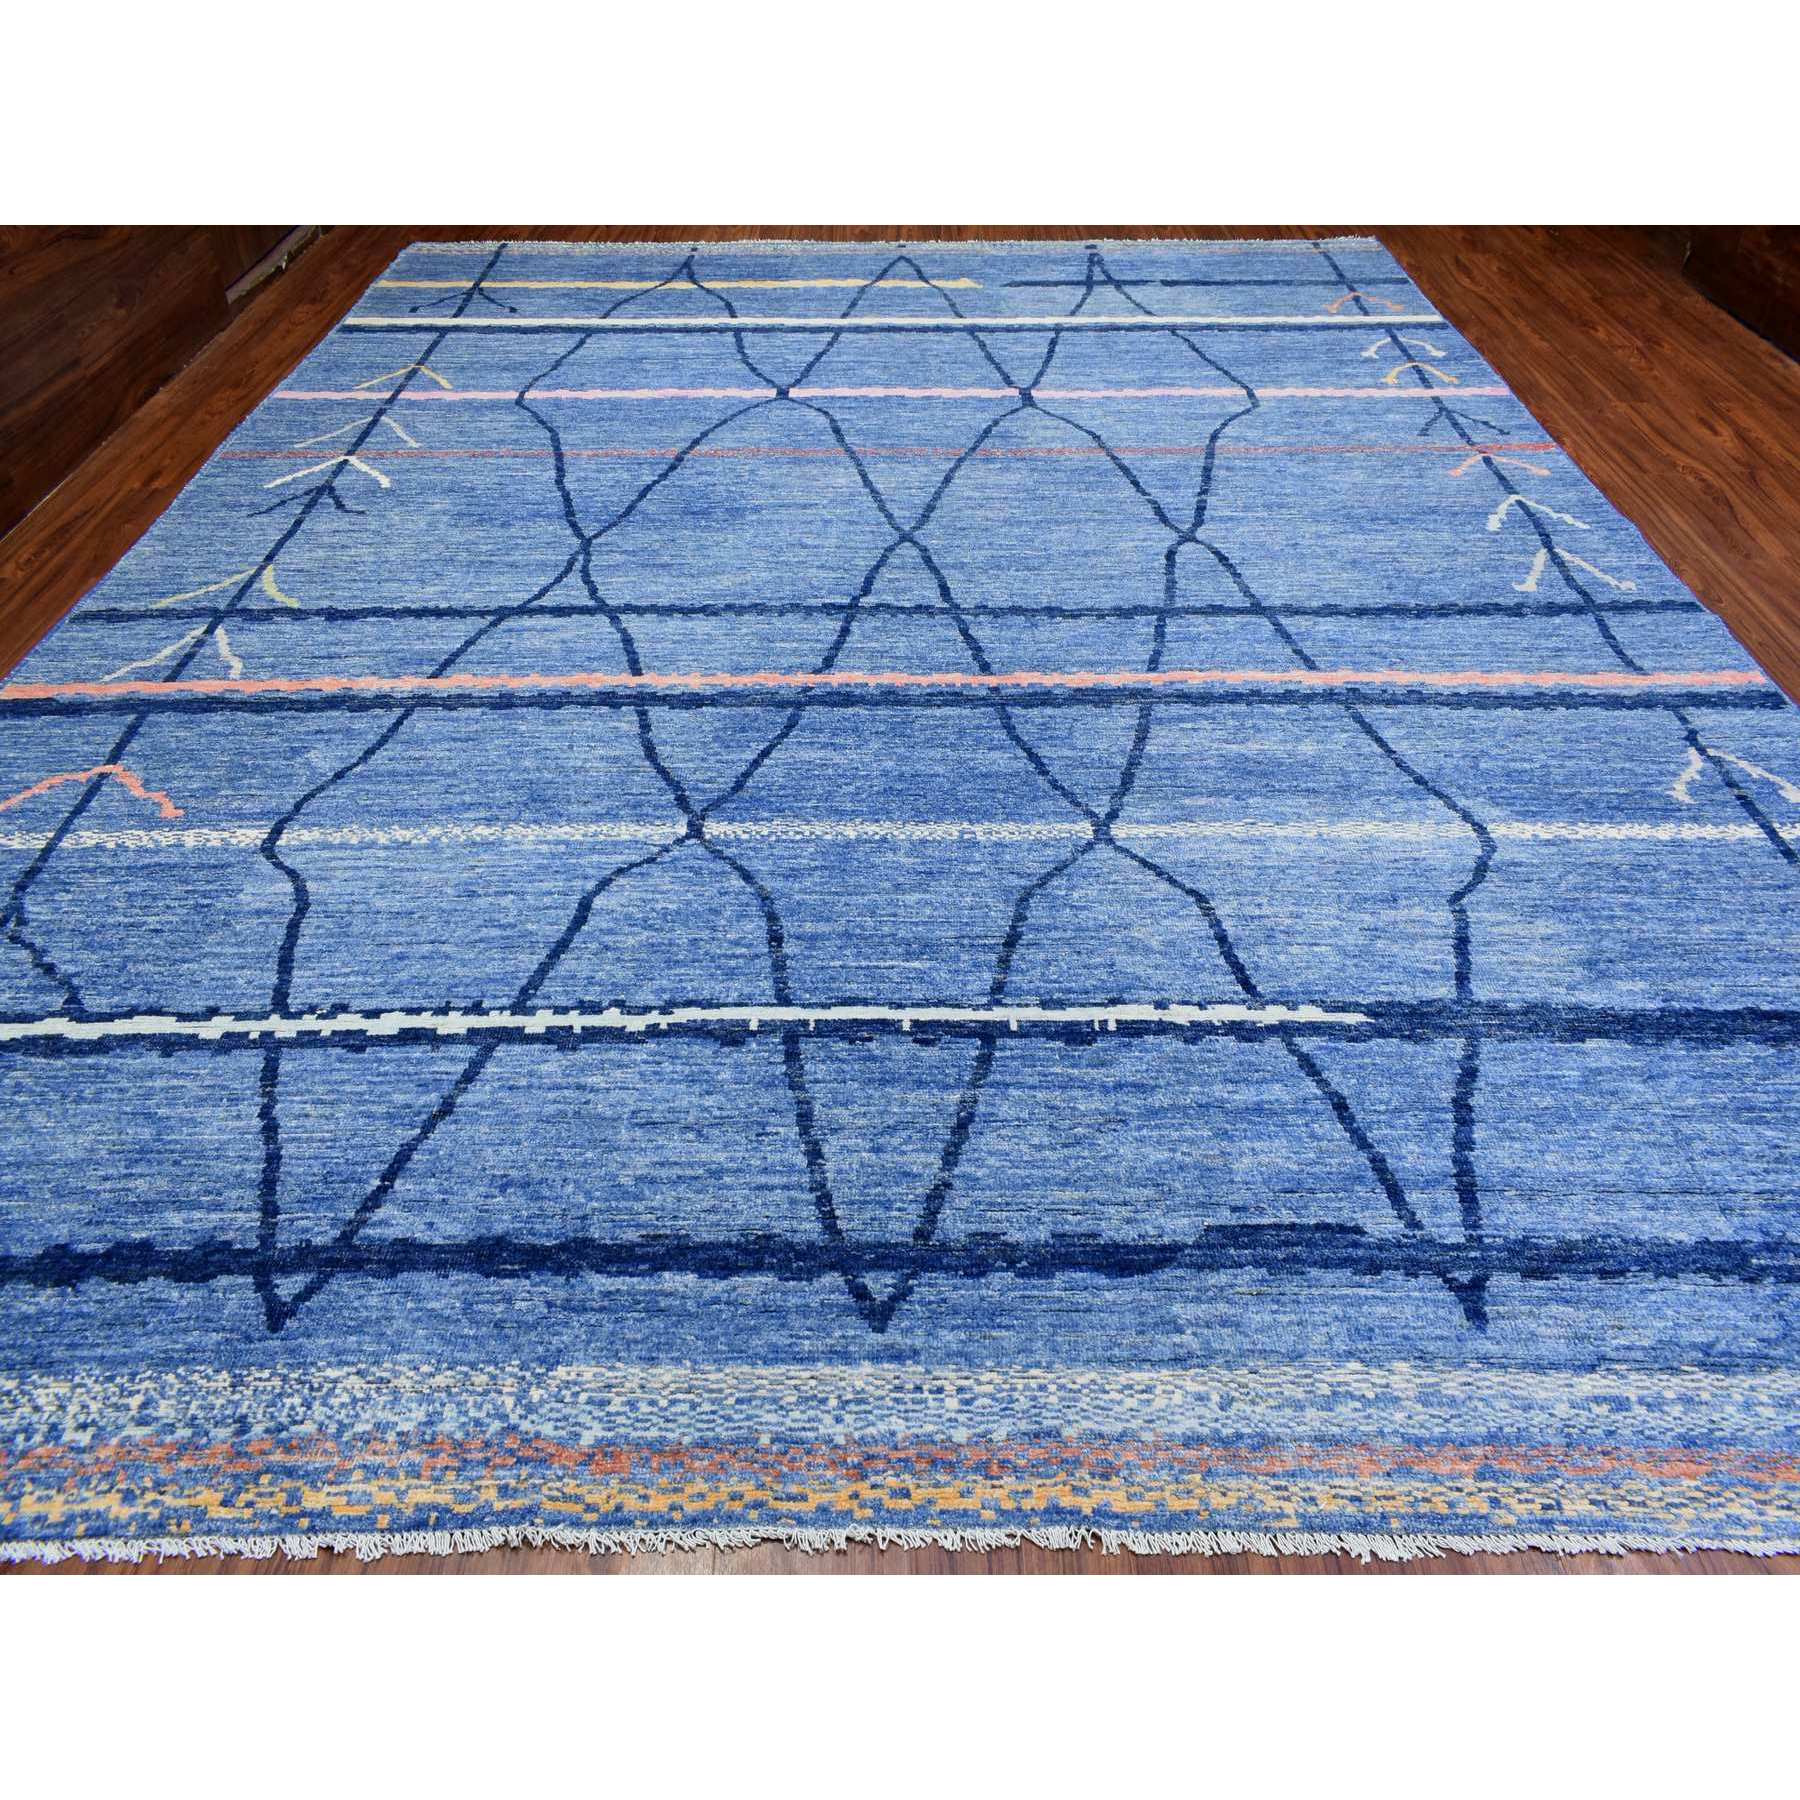 12'x15'2" Denim Blue, Hand Woven Boujaad Moroccan Berber Design with Criss Cross Pattern, Natural Dyes Velvety Wool, Oversized Oriental Rug 